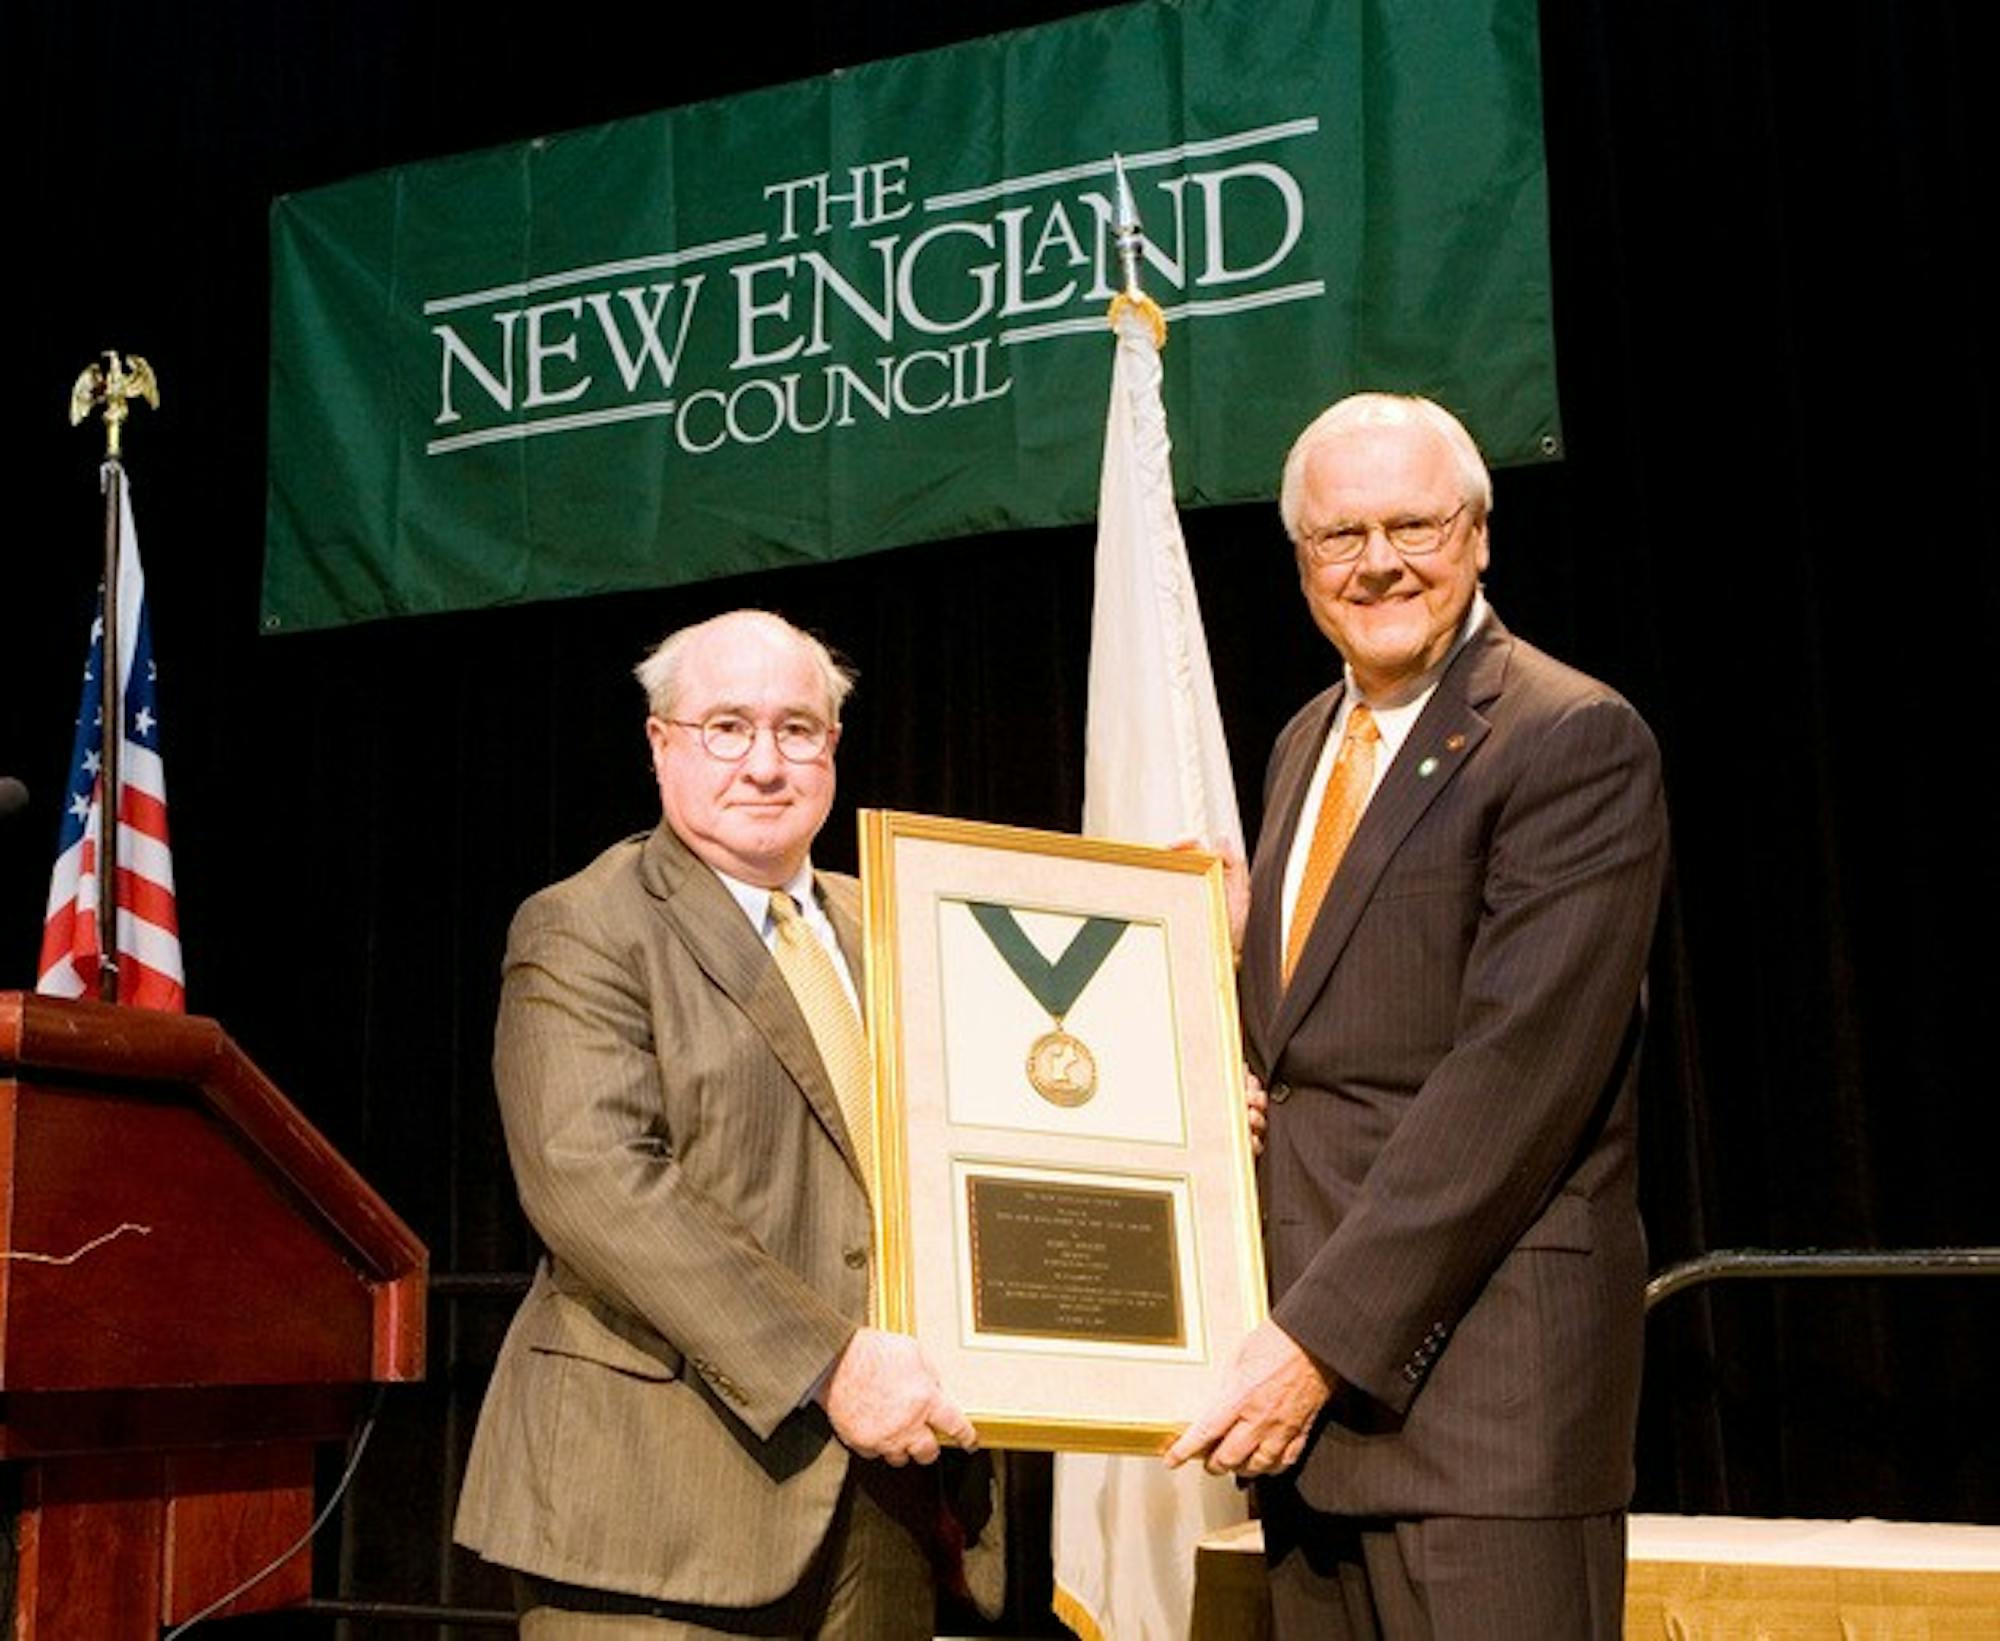 College President James Wright received a New Englander of the Year award last night for his efforts to help send wounded veterans to college.